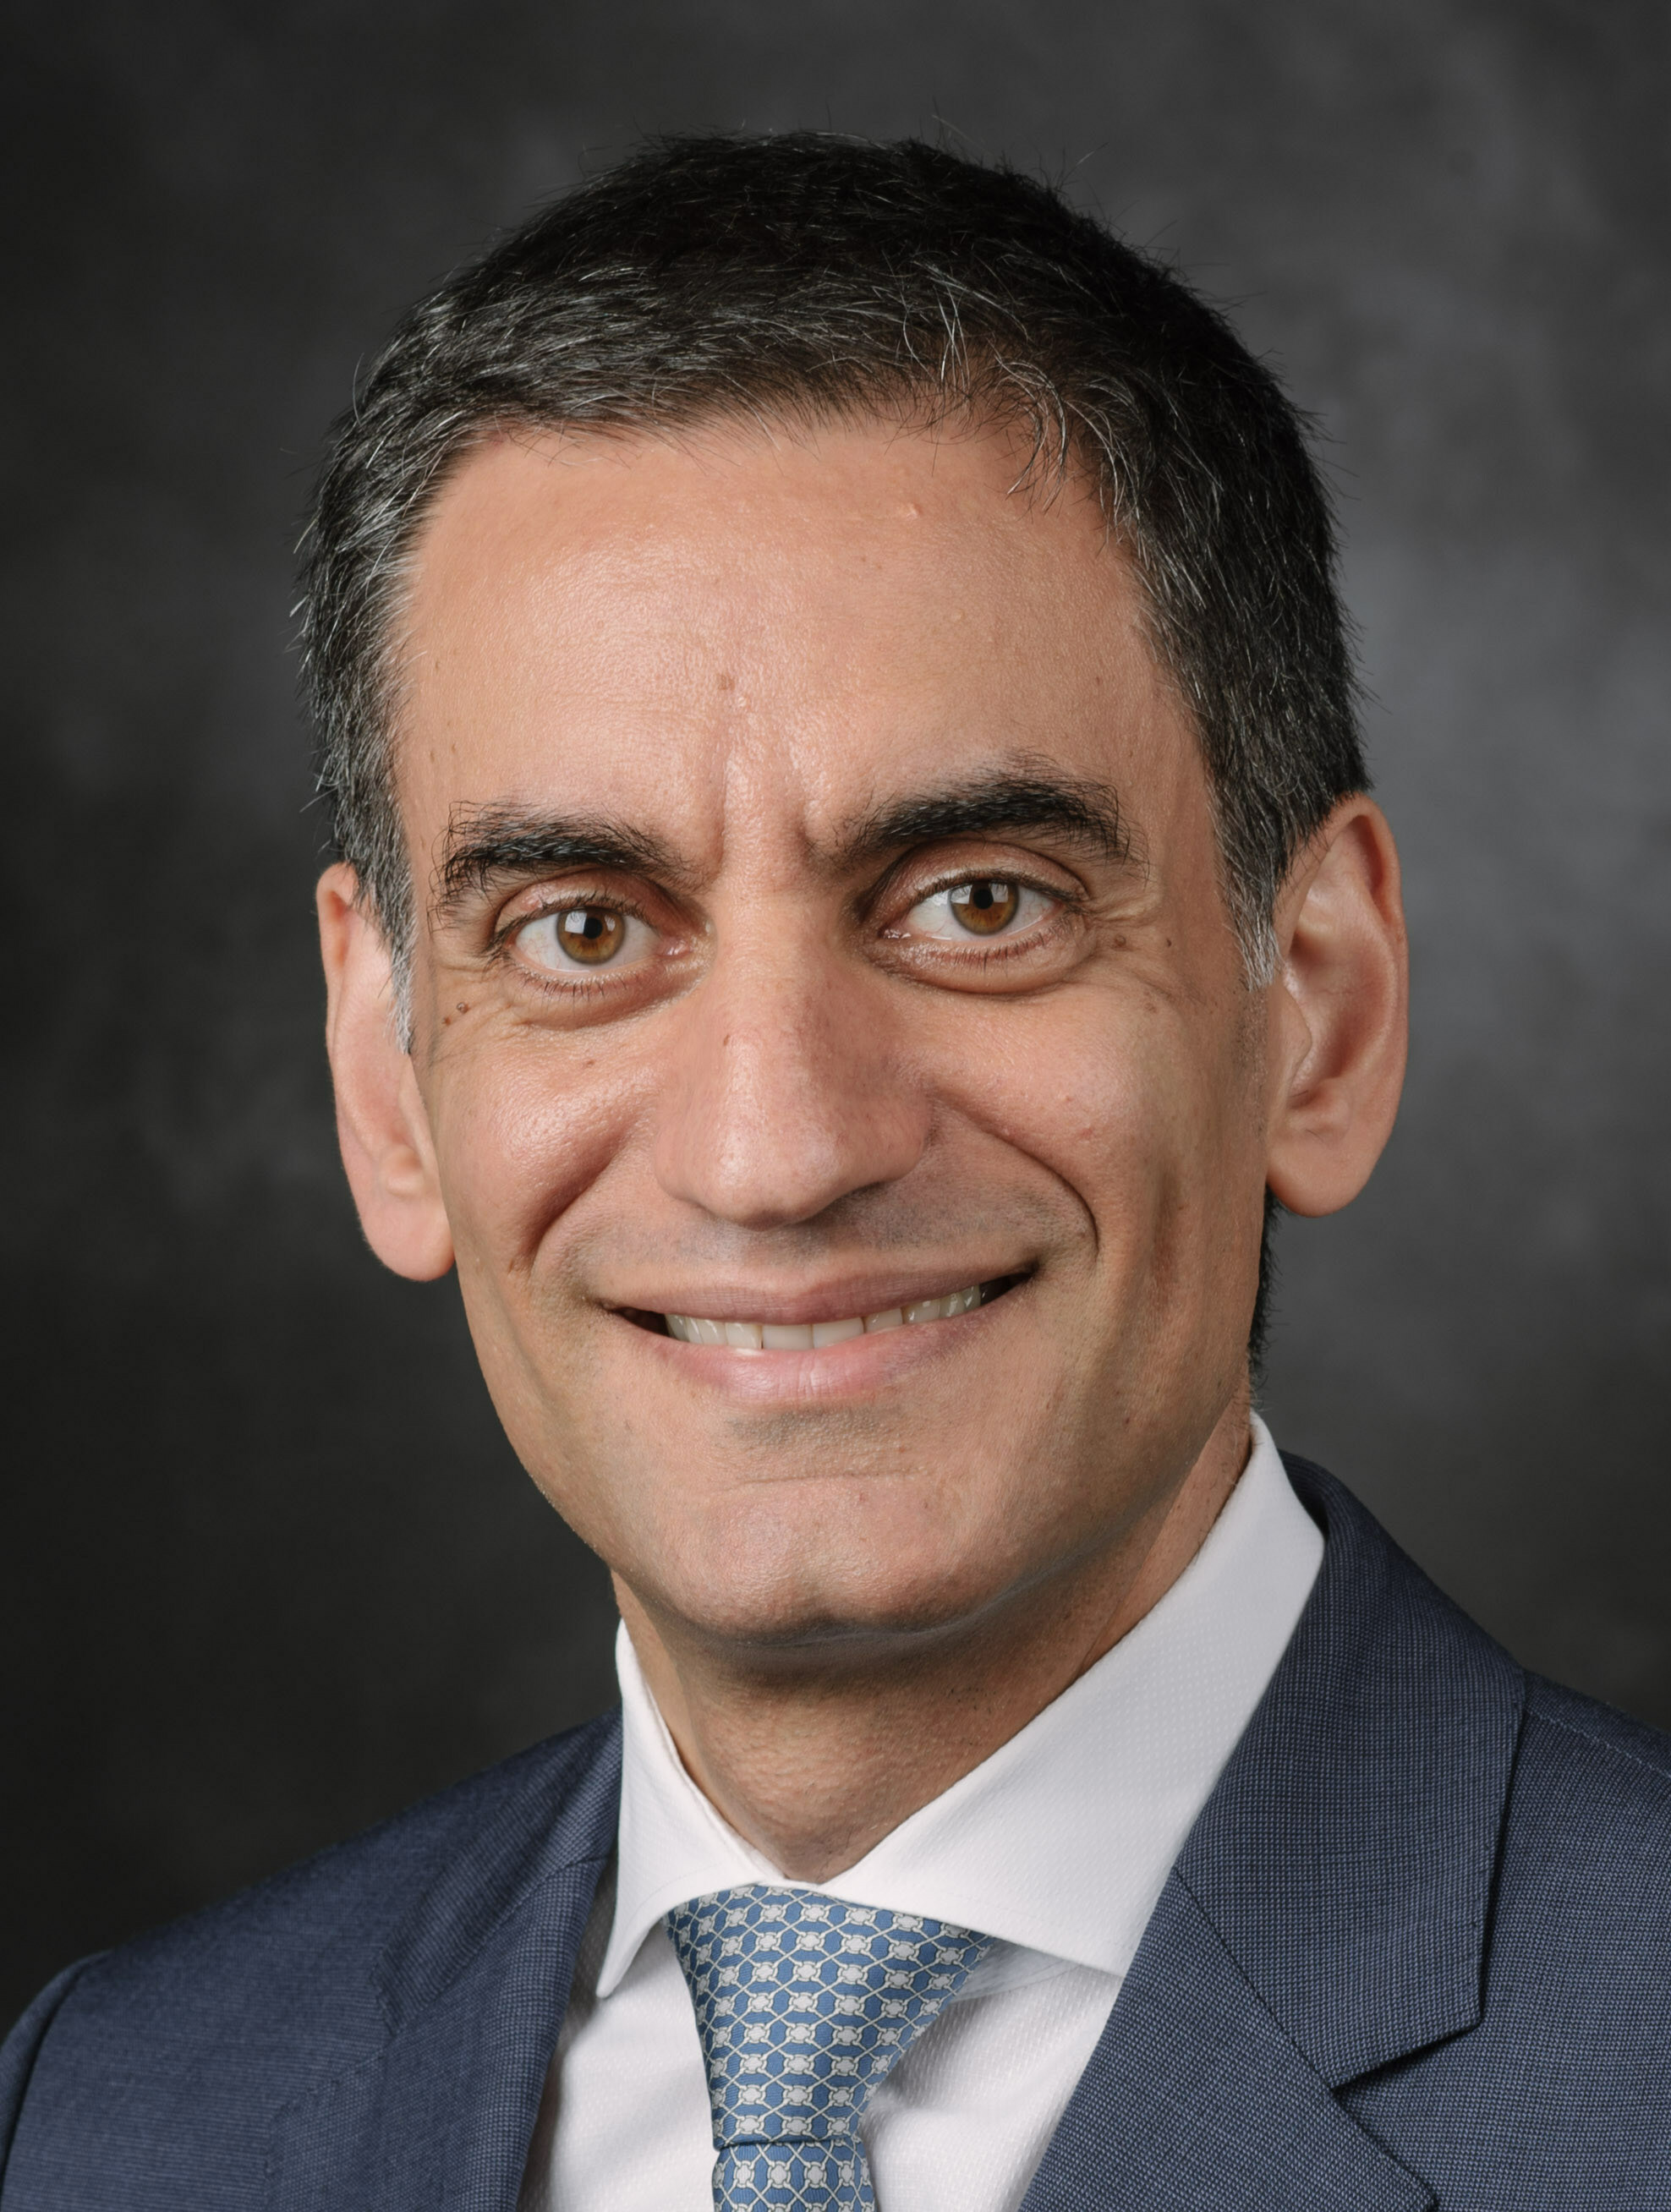 Jose A. Karam, MD, FACS, has been named AUA Assistant Secretary for Europe, the Middle East and Africa.